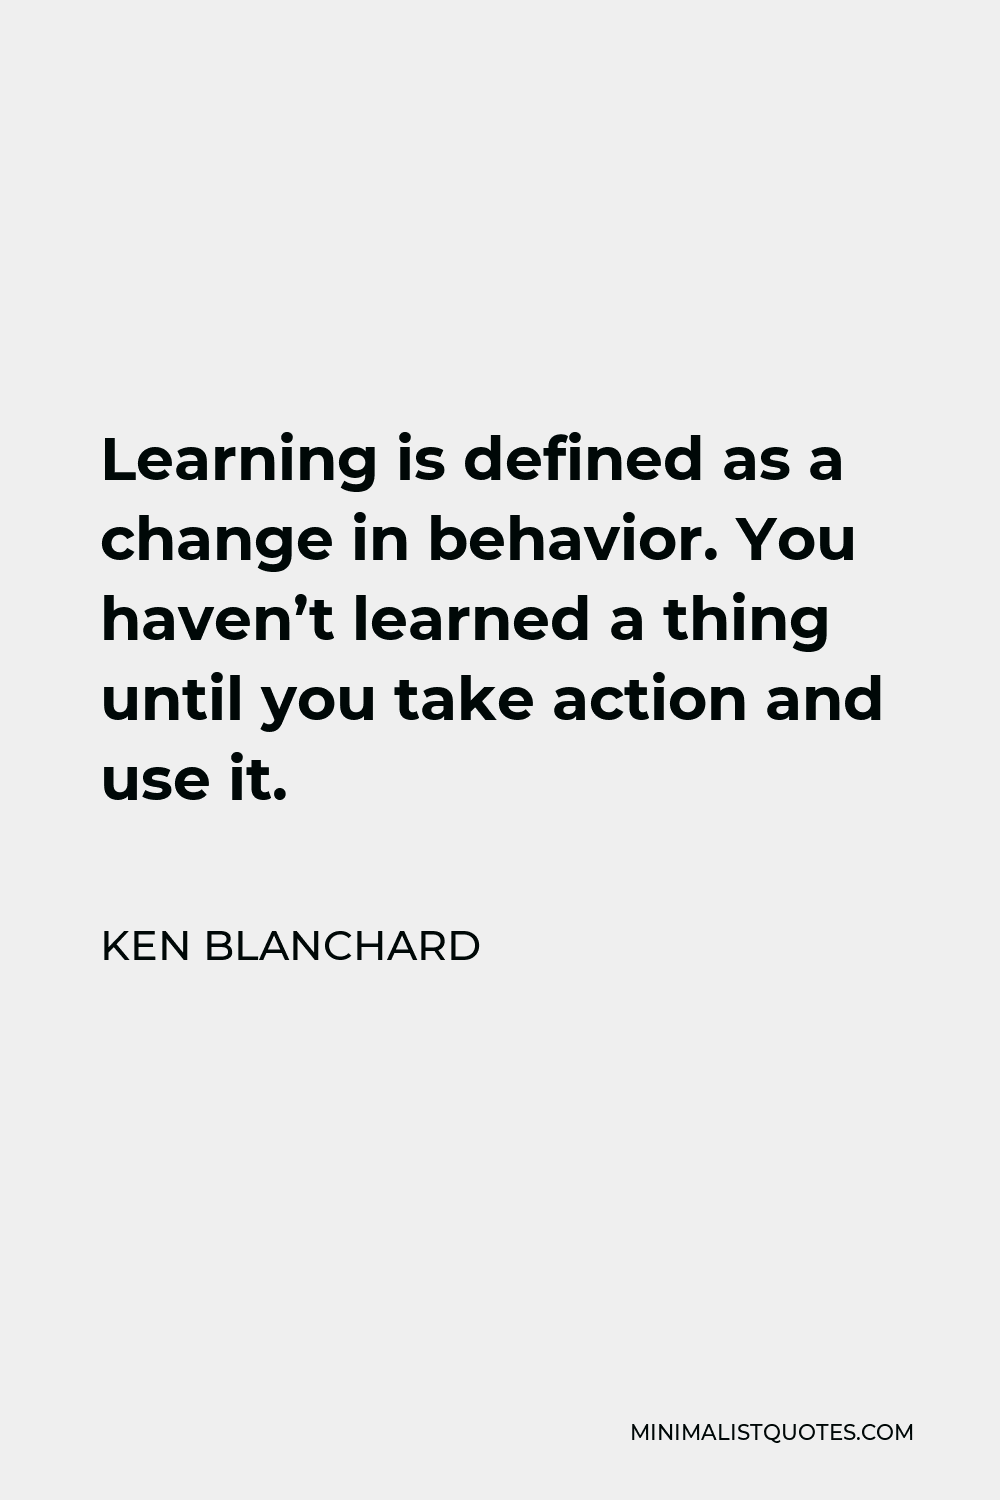 Ken Blanchard Quote - Learning is defined as a change in behavior. You haven’t learned a thing until you take action and use it.